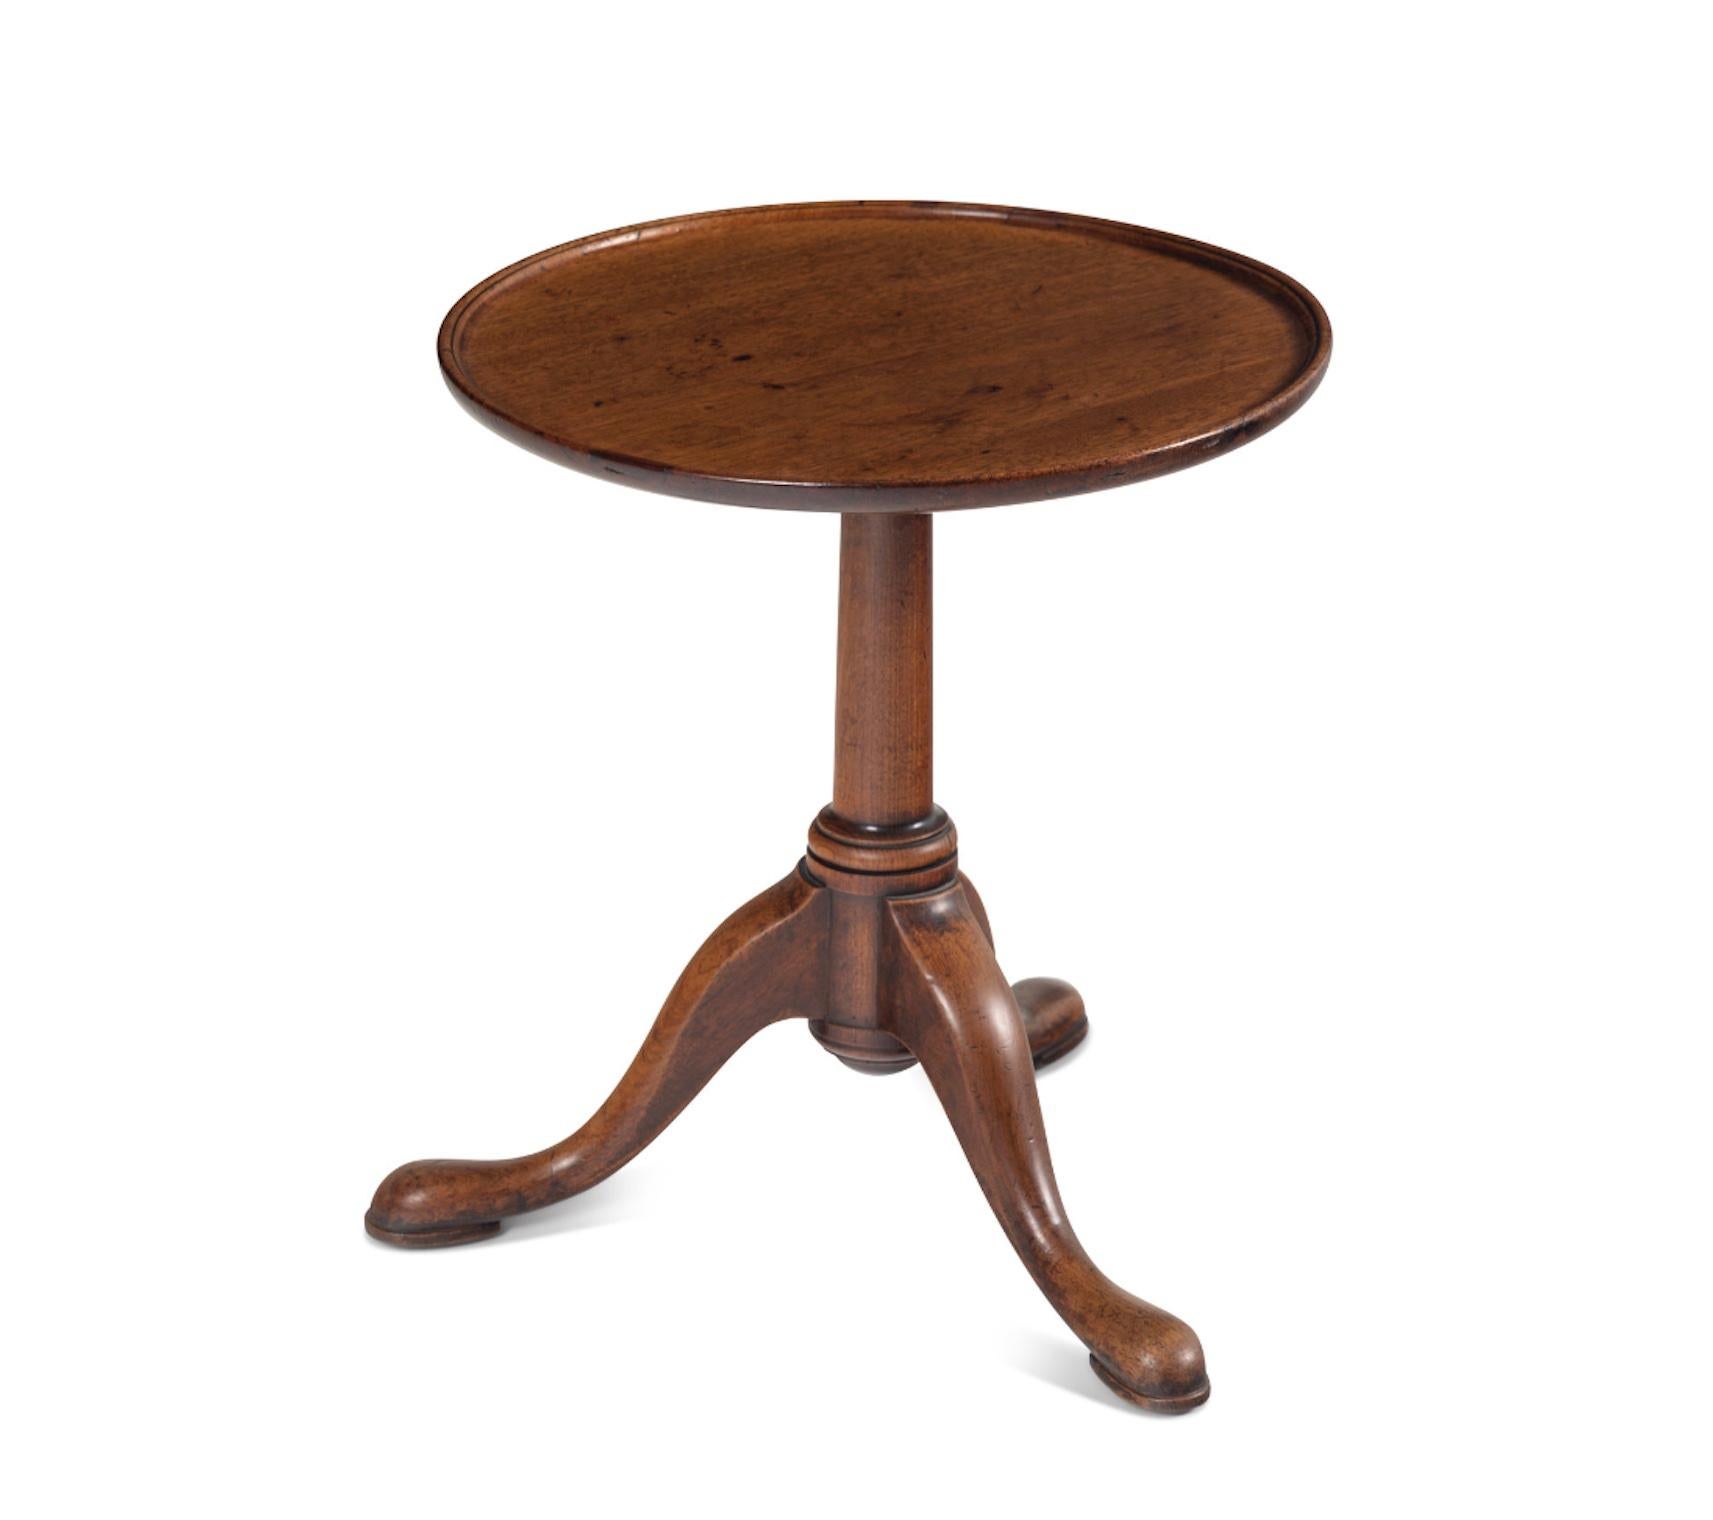 English A George II Walnut Side Table or Candle Stand Mid 18th Century. Great patina.